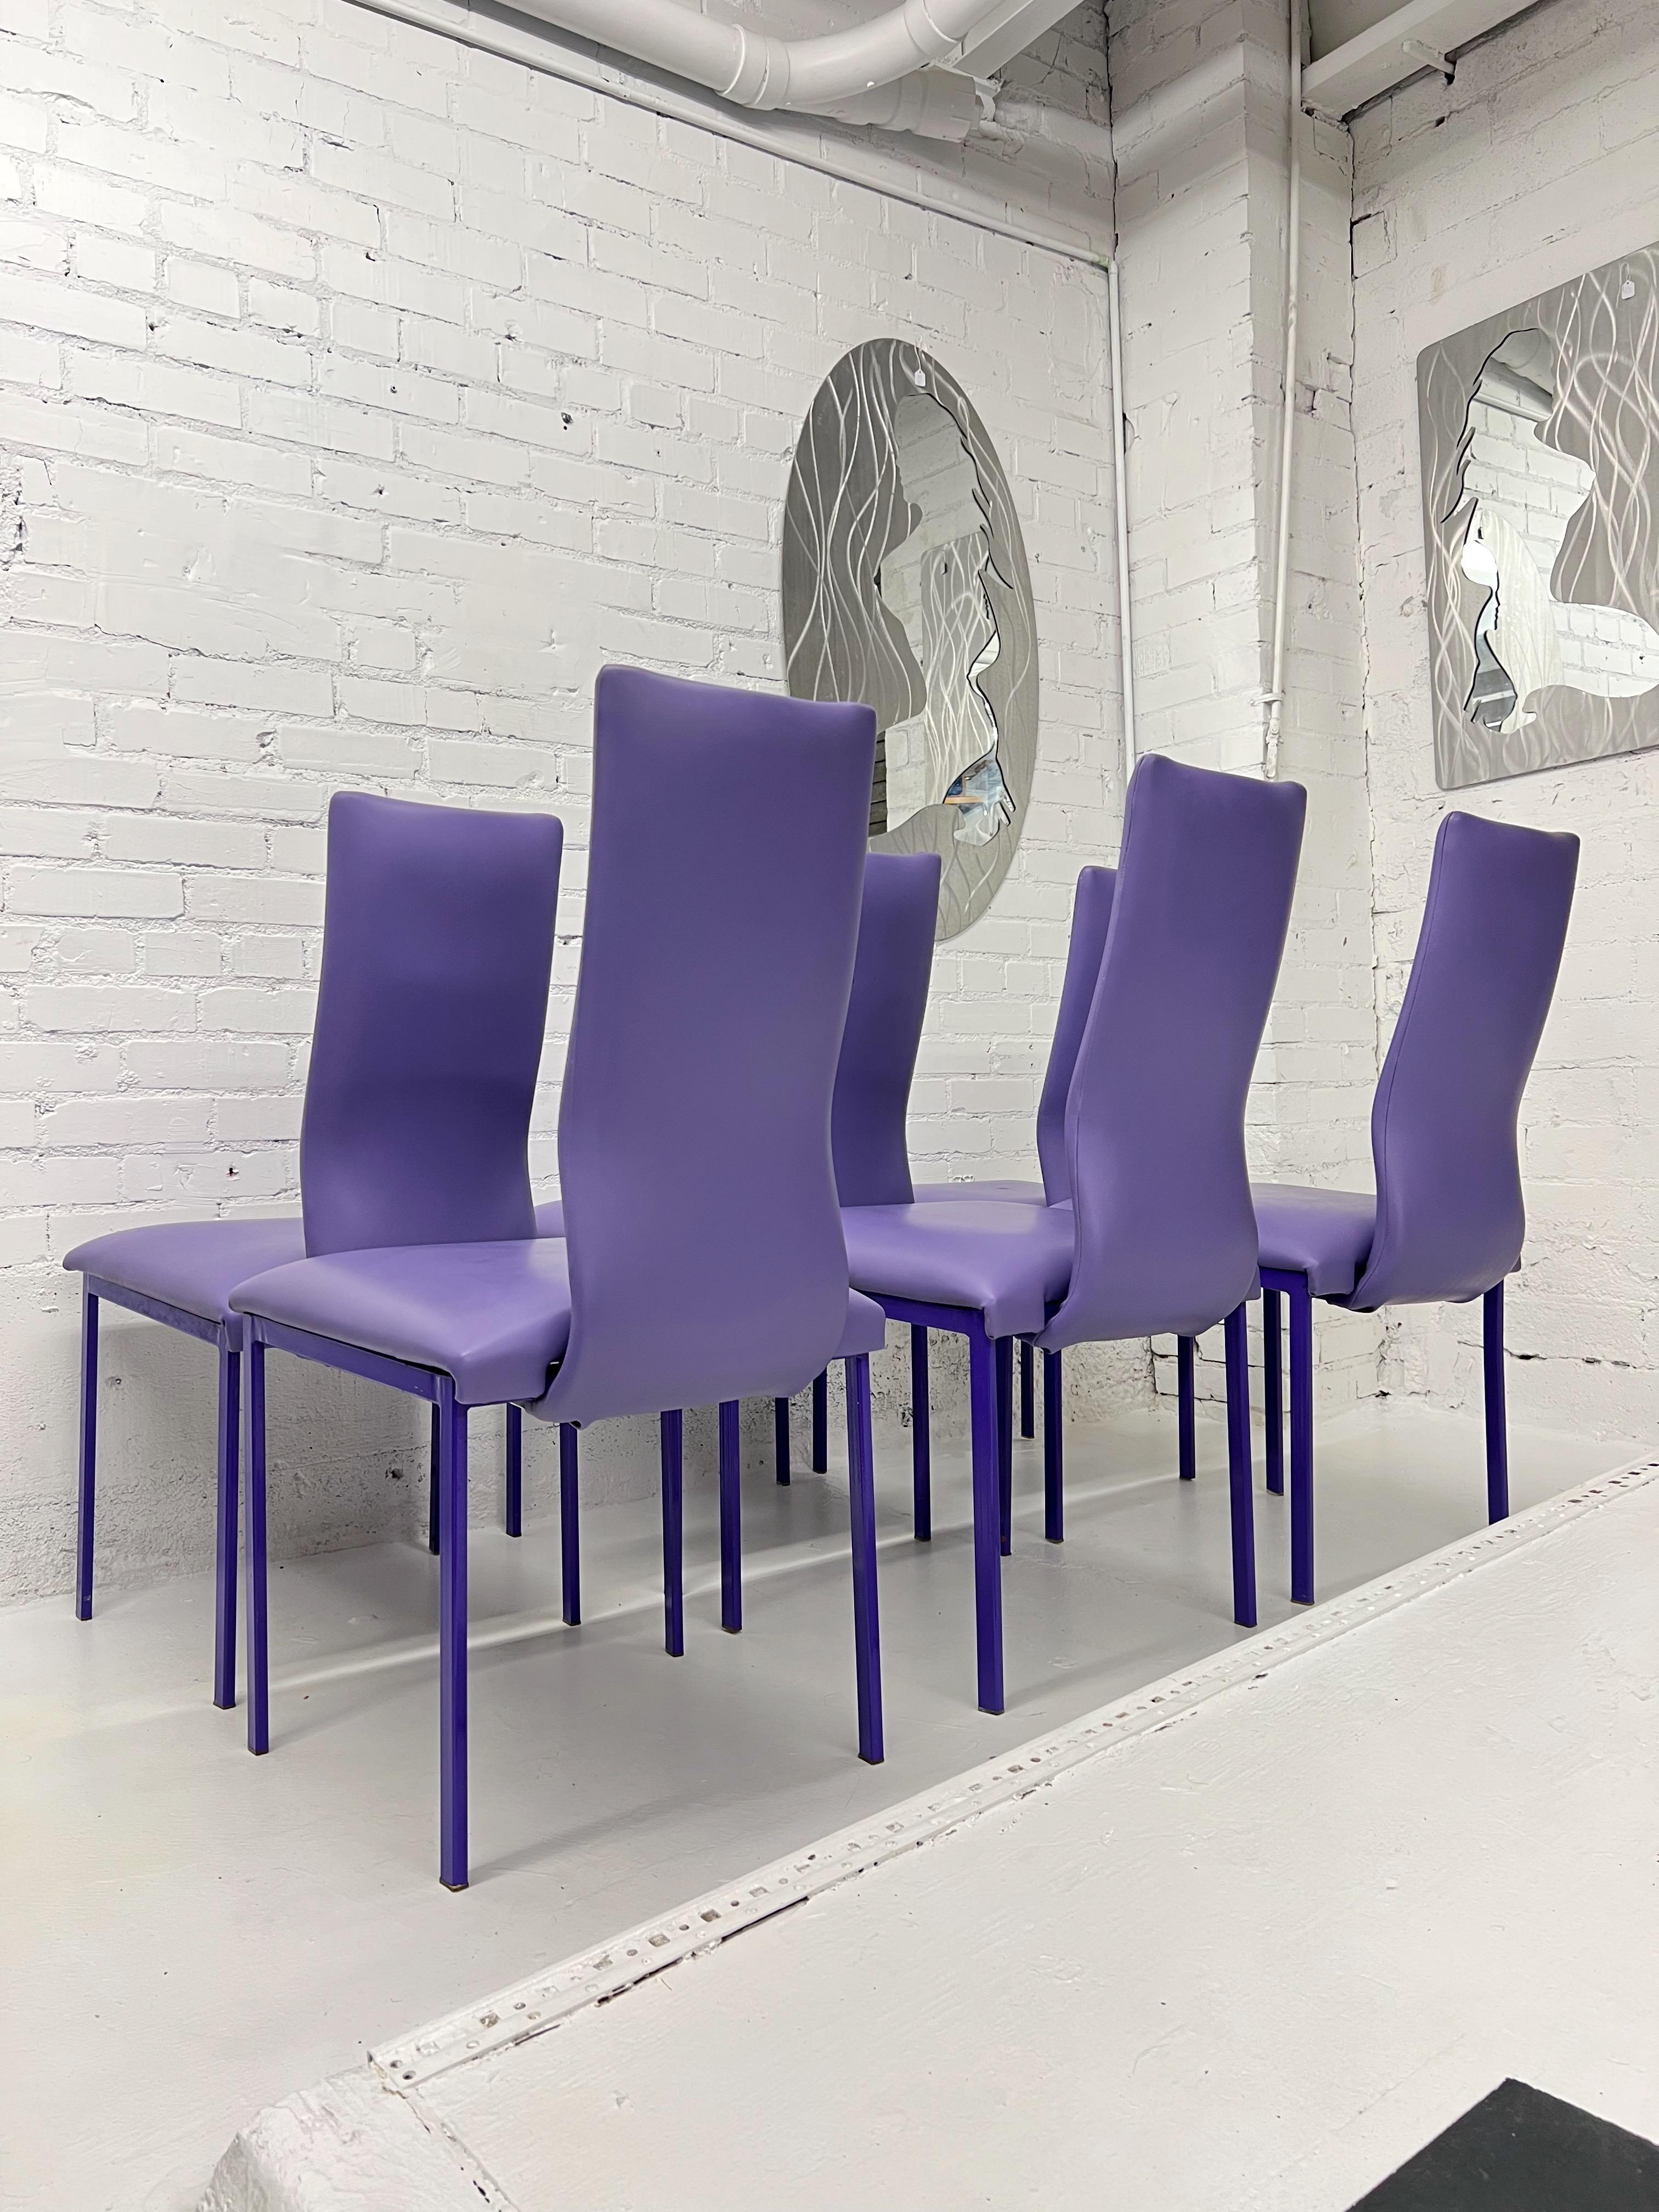 American Minson Corp. Postmodern Sculptural Lavender Purple Chairs - Set of 6 For Sale